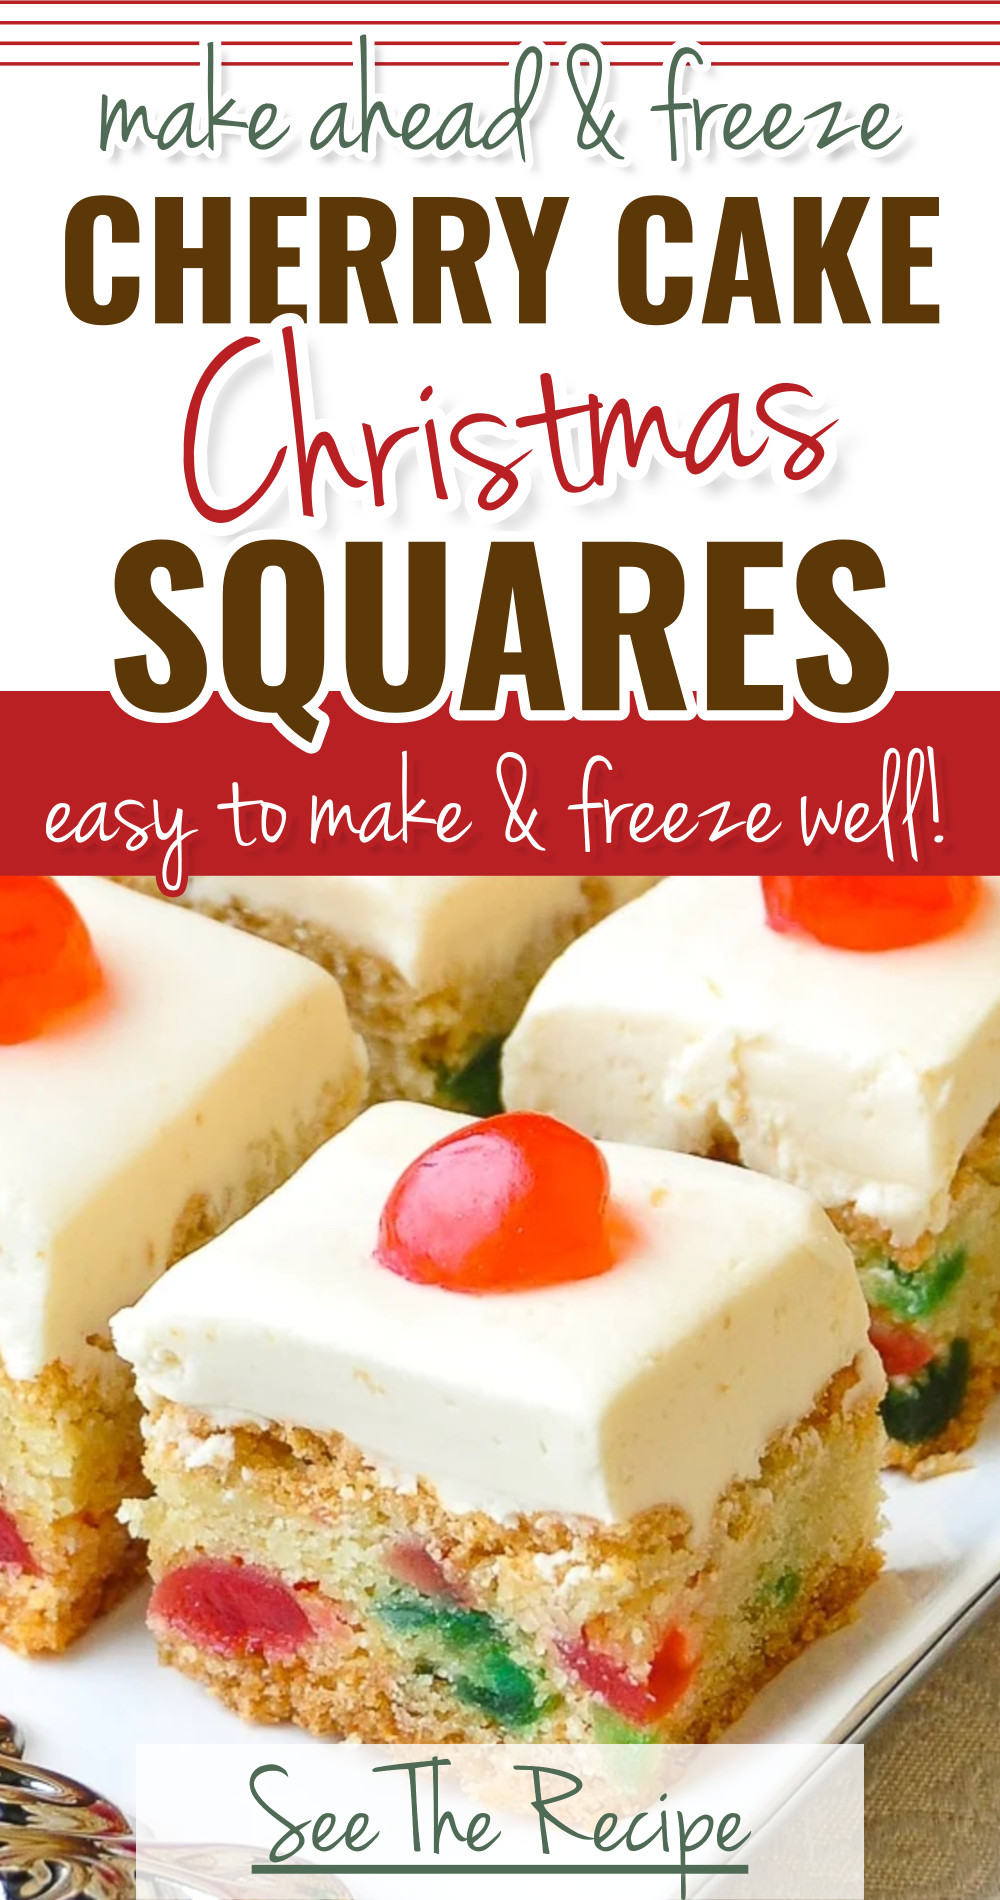 Make ahead and freeze cherry cake squares - easy to make and they freeze well